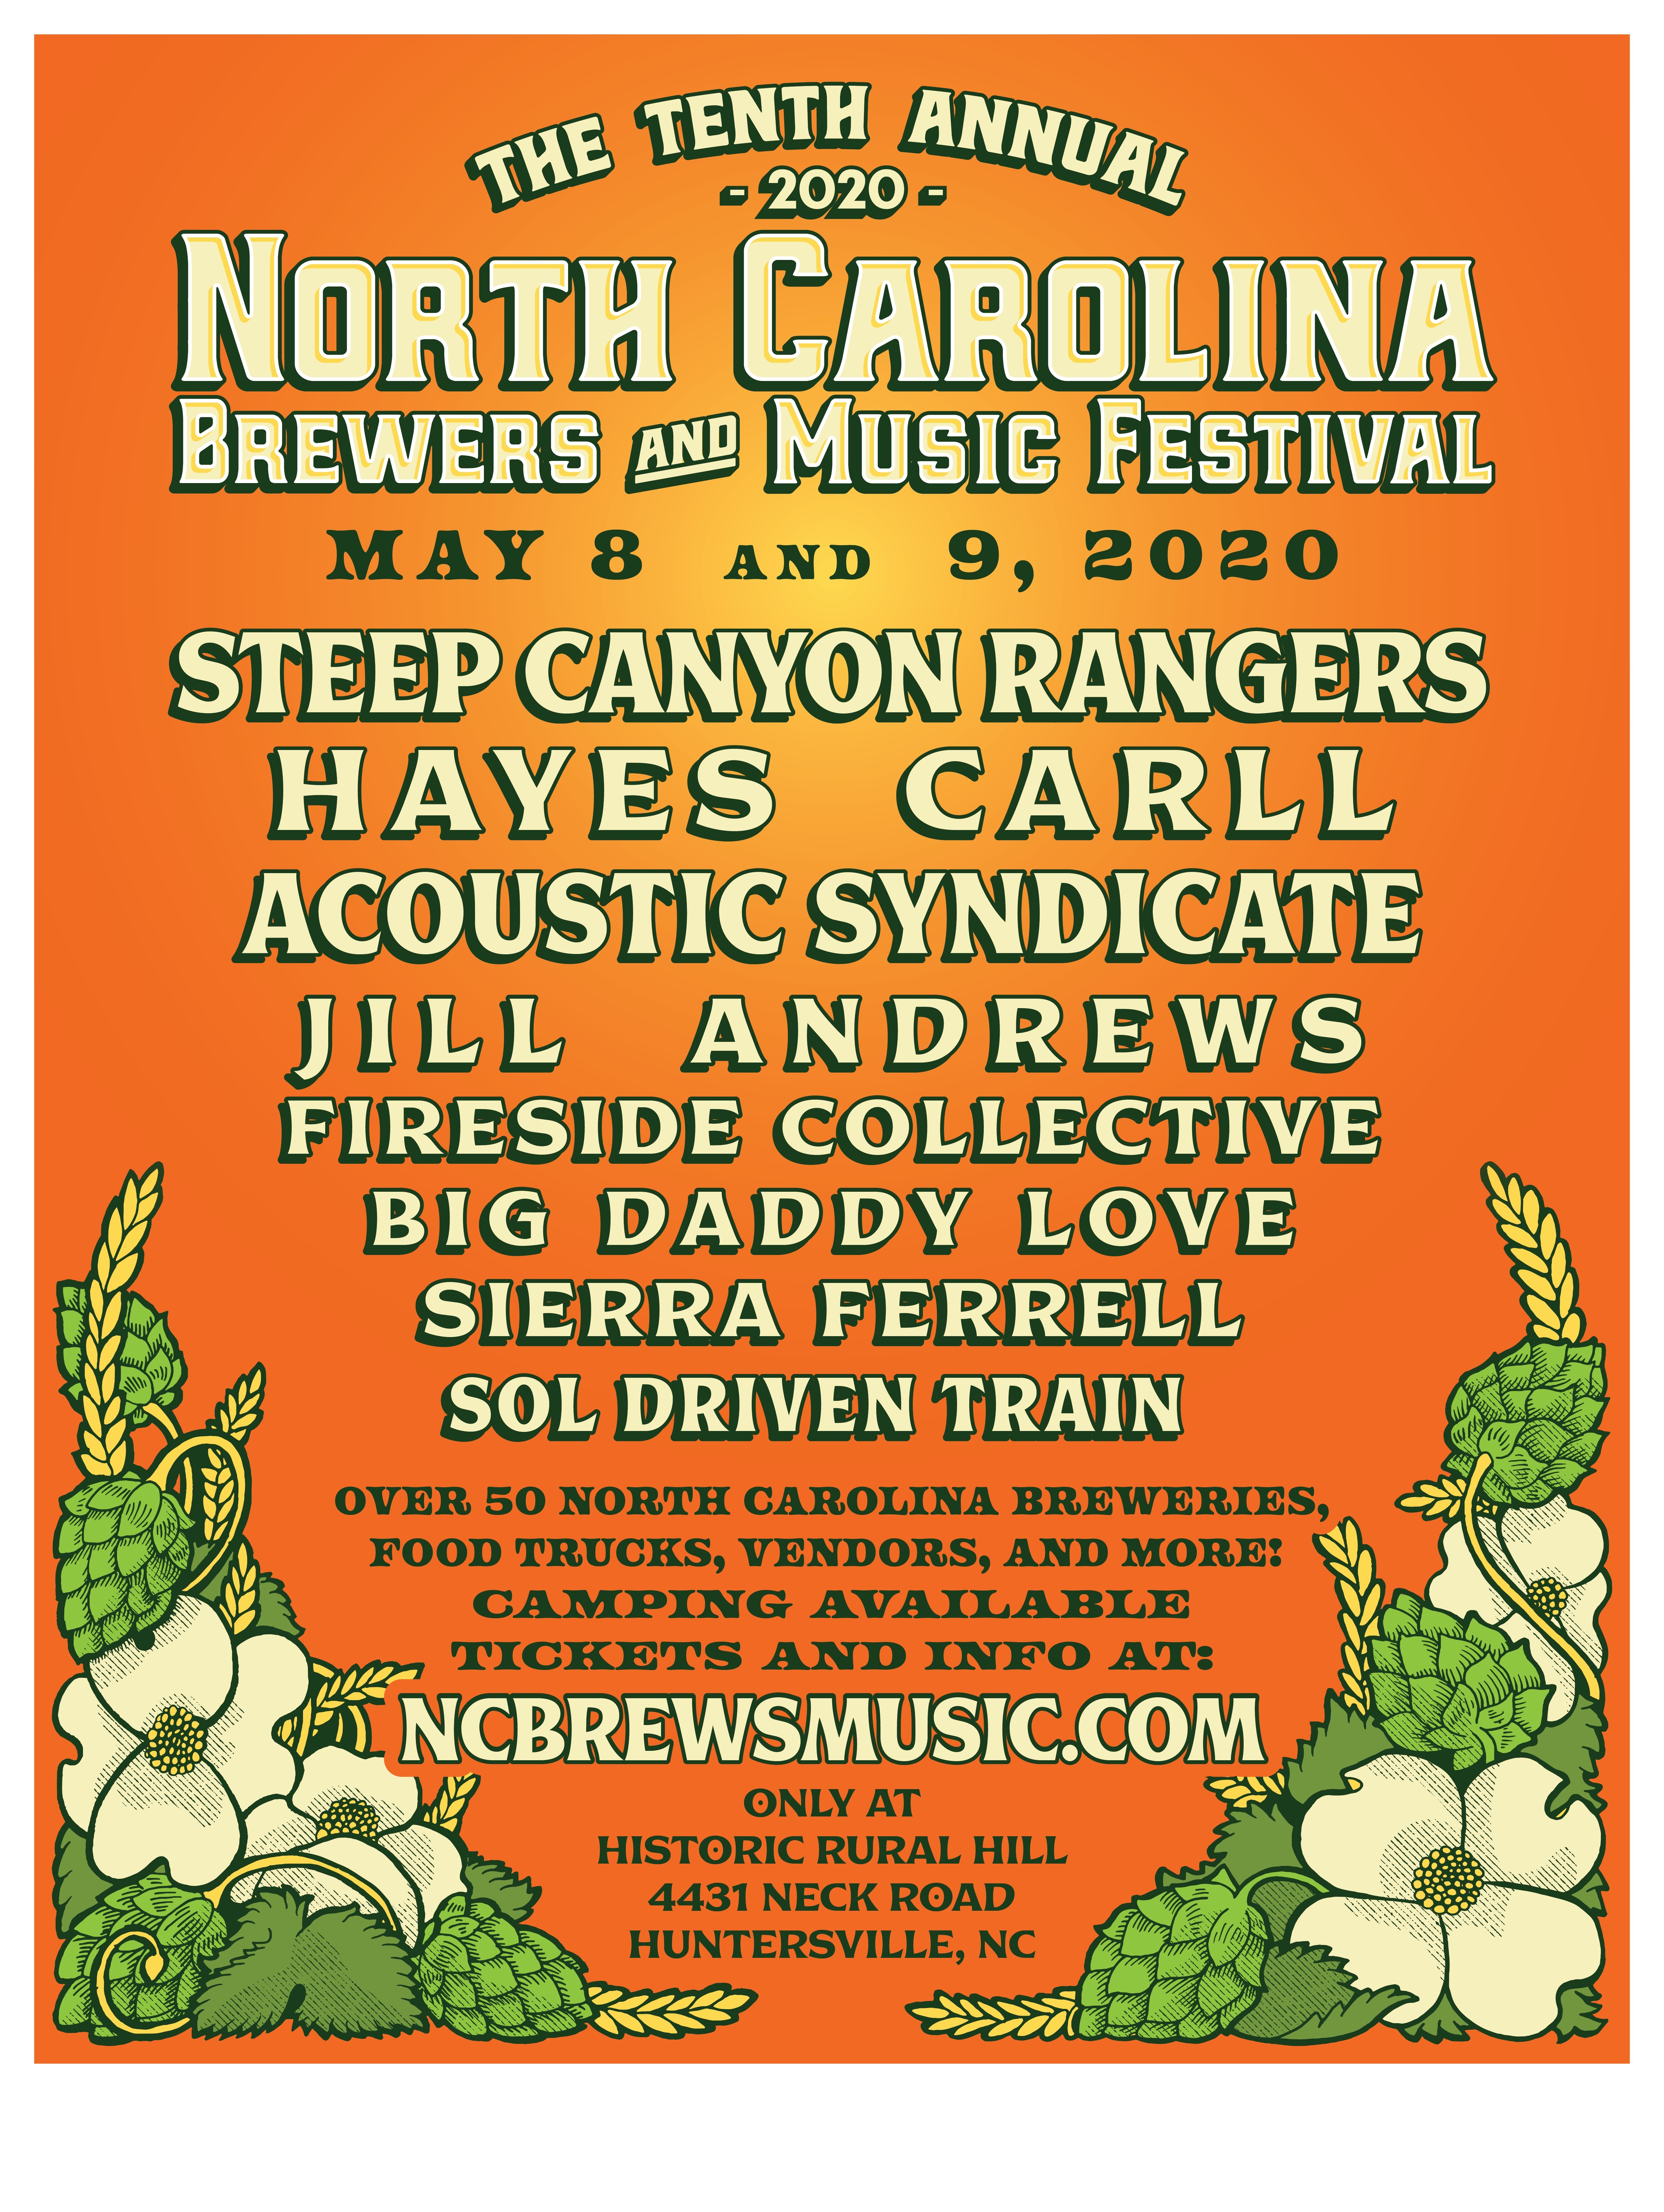 Steep Canyon Rangers to Headline 10th Annual NC Brewers and Music Festival